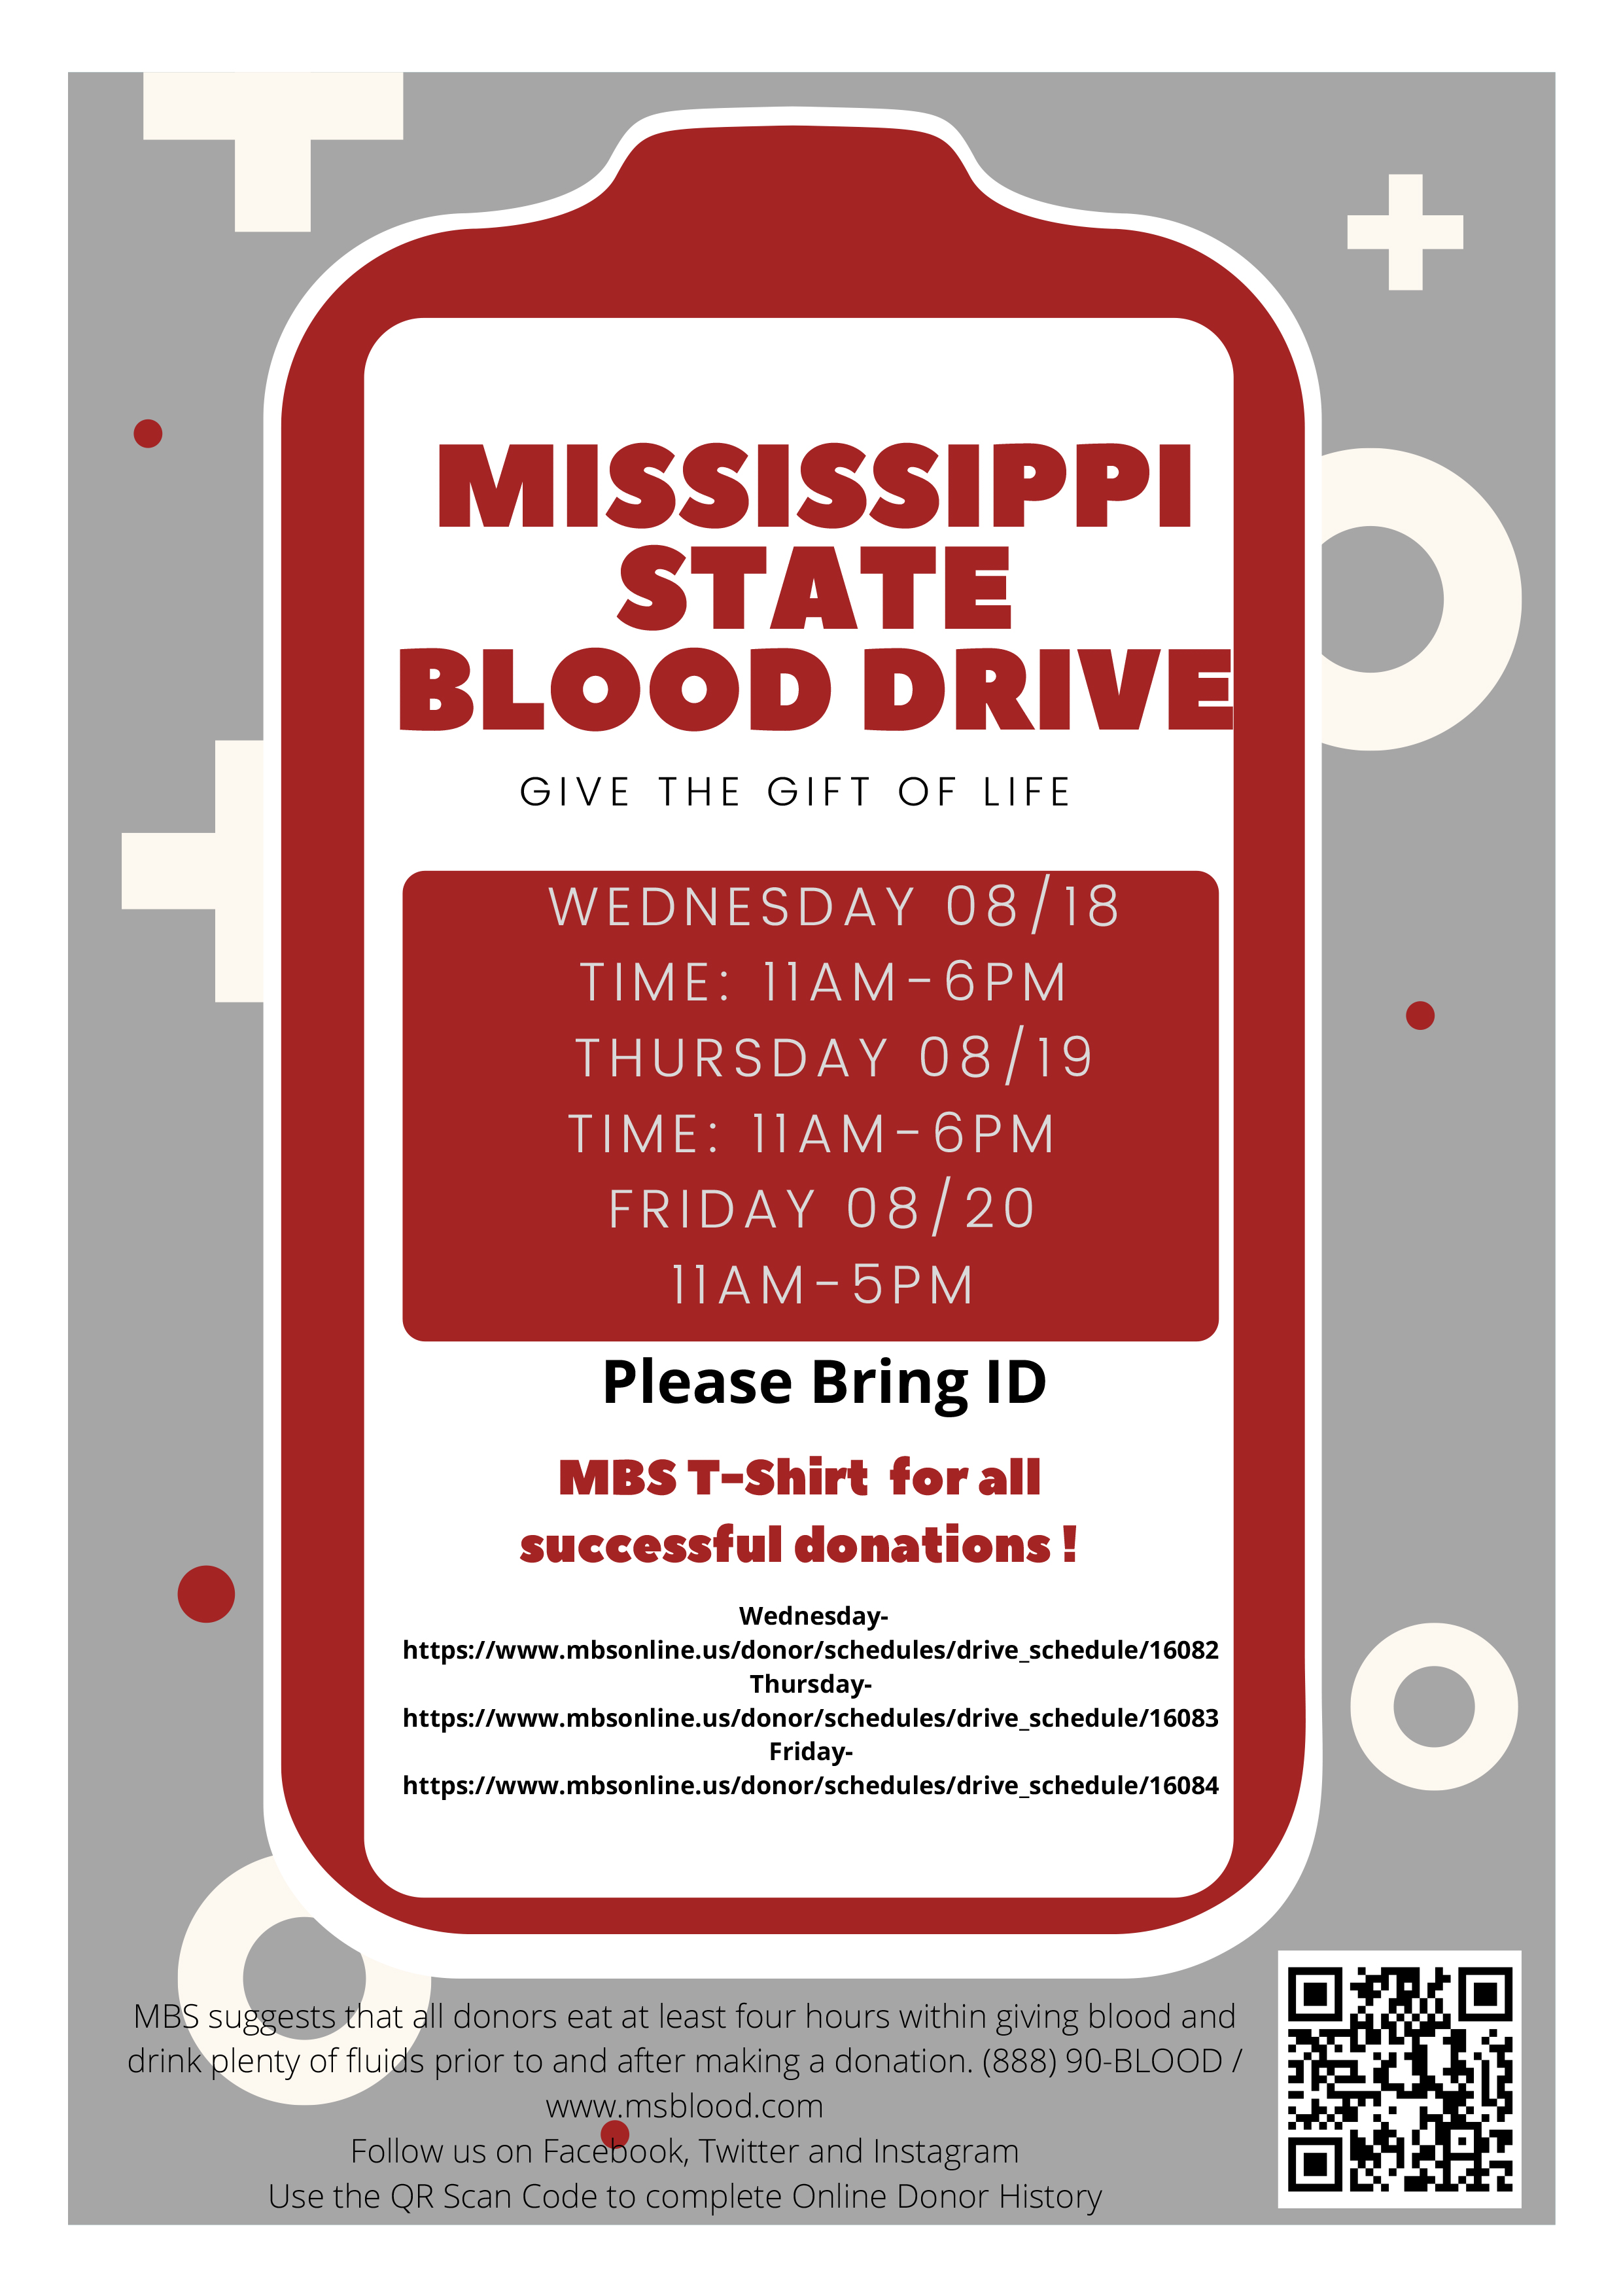 Red, white and gray graphic listing dates and times for the Mississippi State Blood Drive